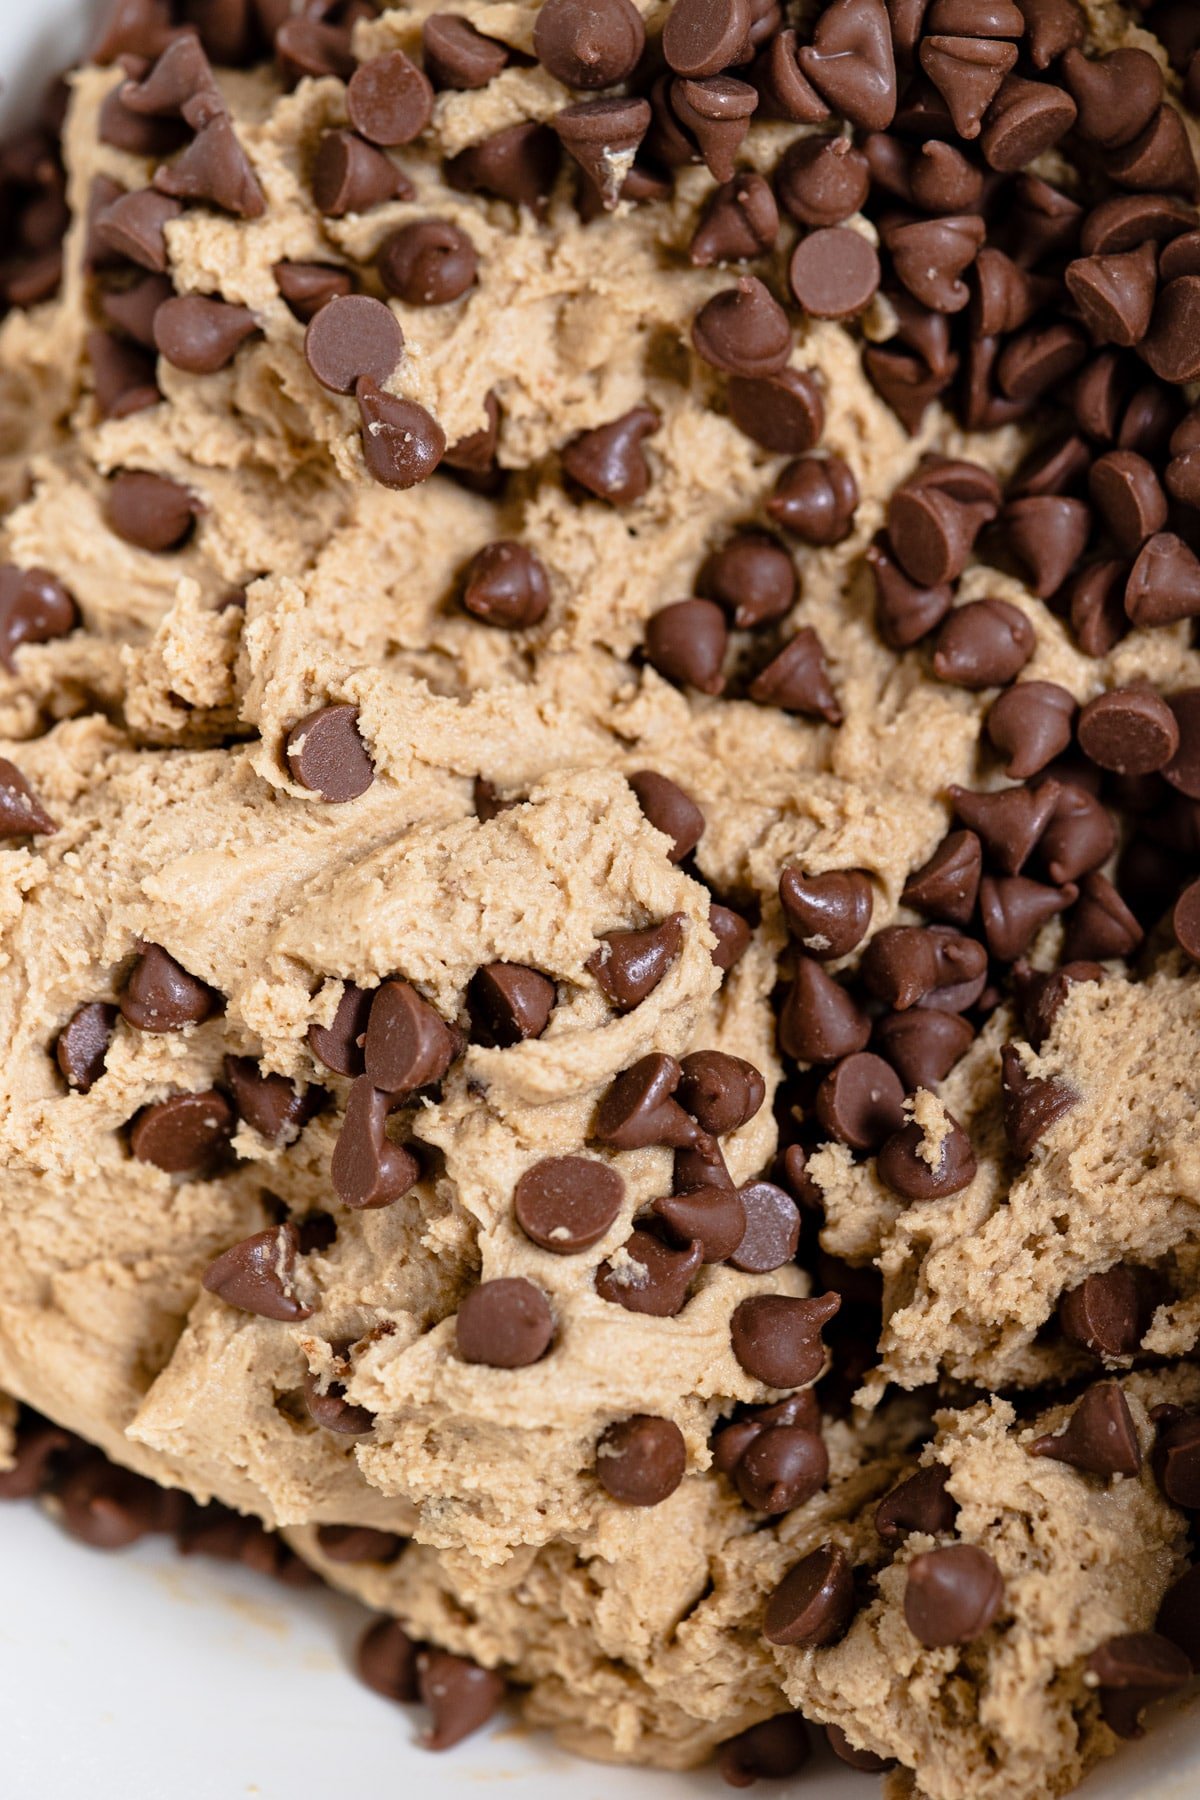 Close up photo of chocolate chip cookie dough.